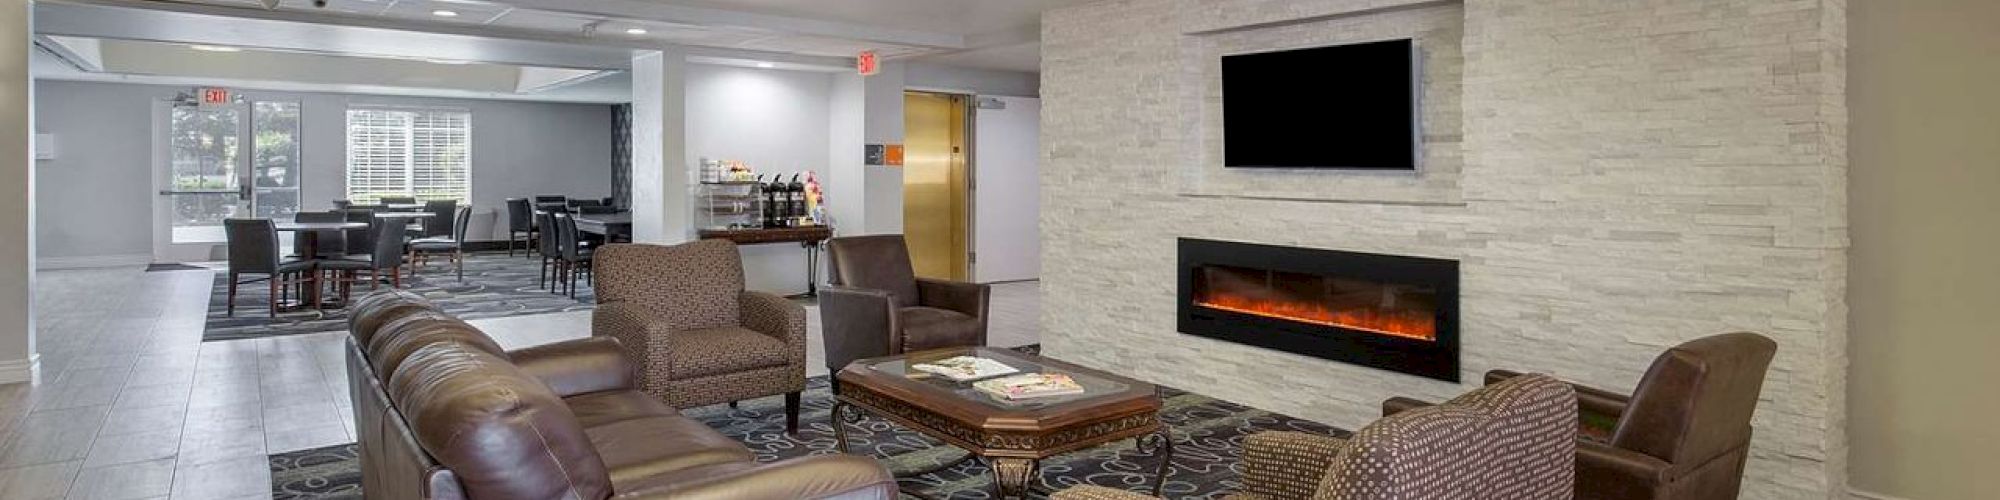 A modern living space with leather sofas, armchairs, a fireplace, wall-mounted TV, and a dining area in the background.